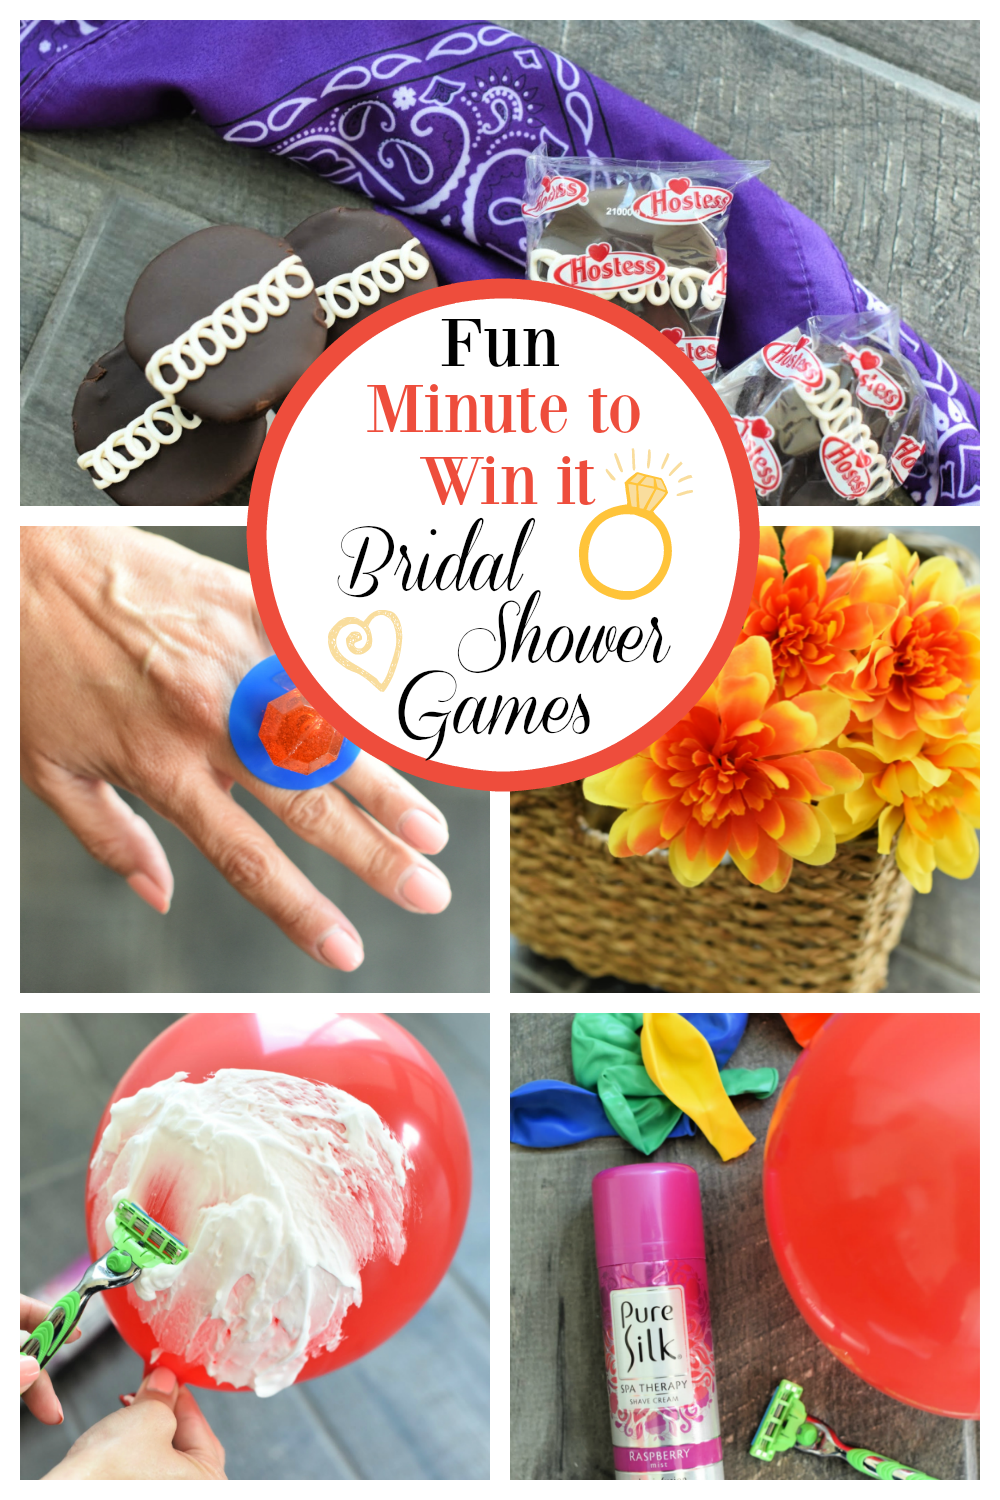 Bridal Shower Minute to Win it Games. Fun games to play at any bridal shower. #bridalshowergames #minutetowinitgames #fungames #bridalshowers